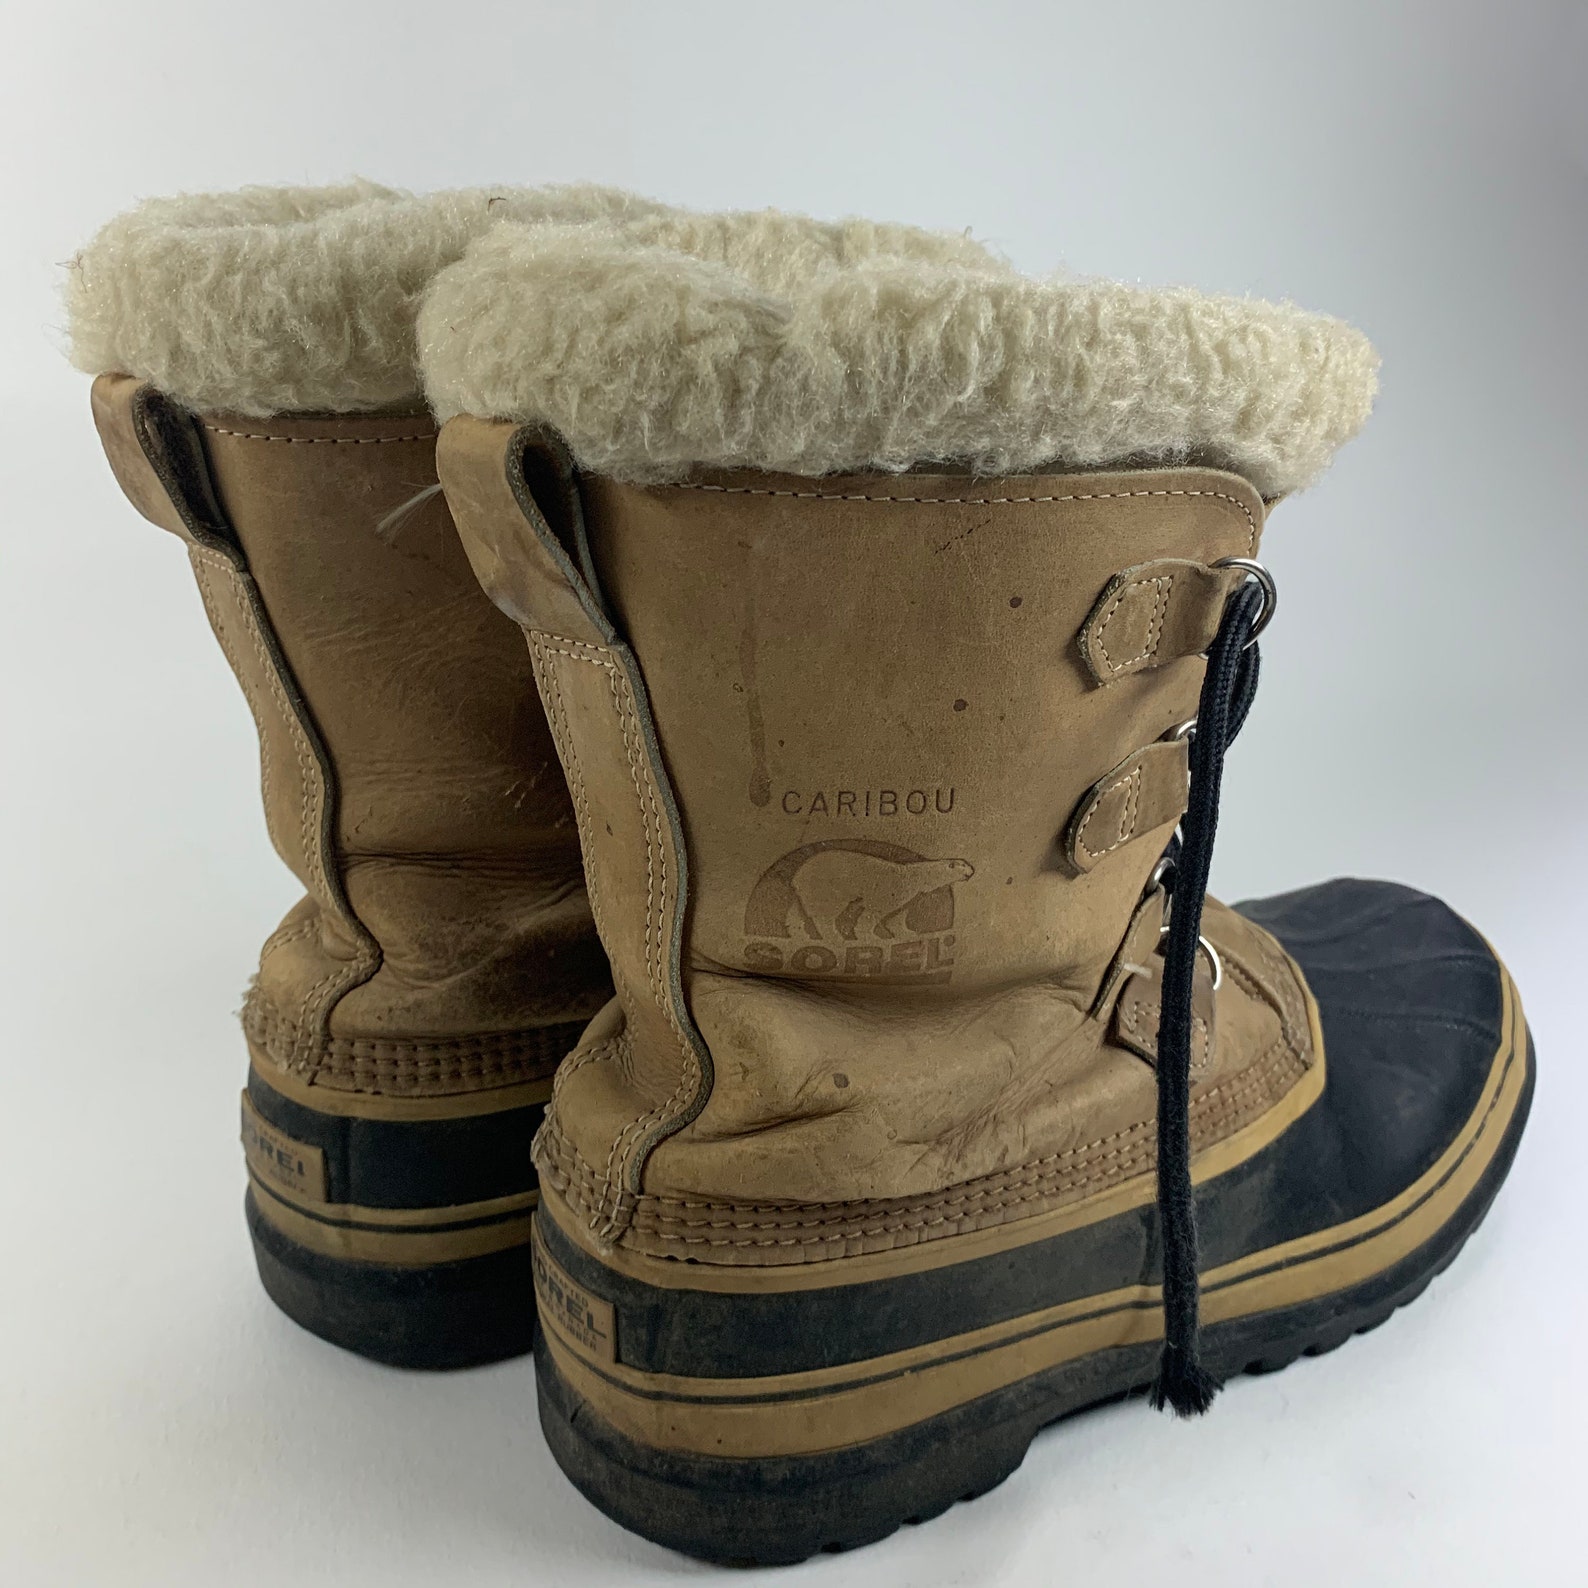 Vintage Sorel Caribou Wool Lined Rain Boots Lace up Hiking Snow Work ...